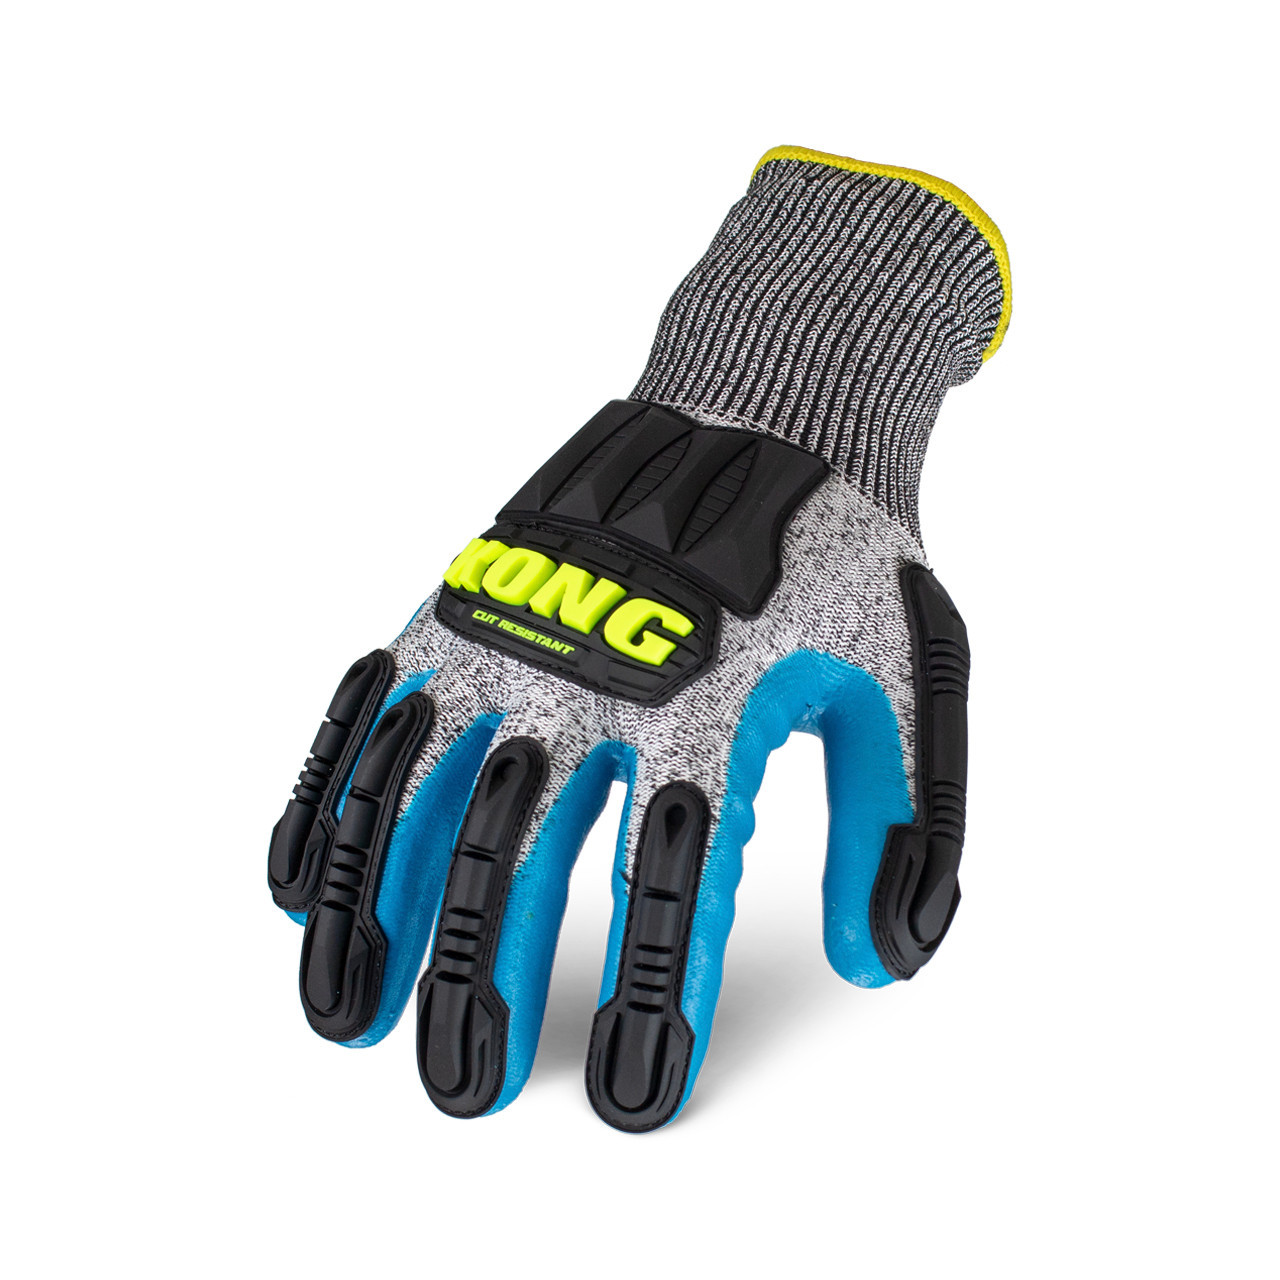 Ironclad KONG 360 Cut A4 Insulated Gloves, Gray/Blue, X-Large, (12